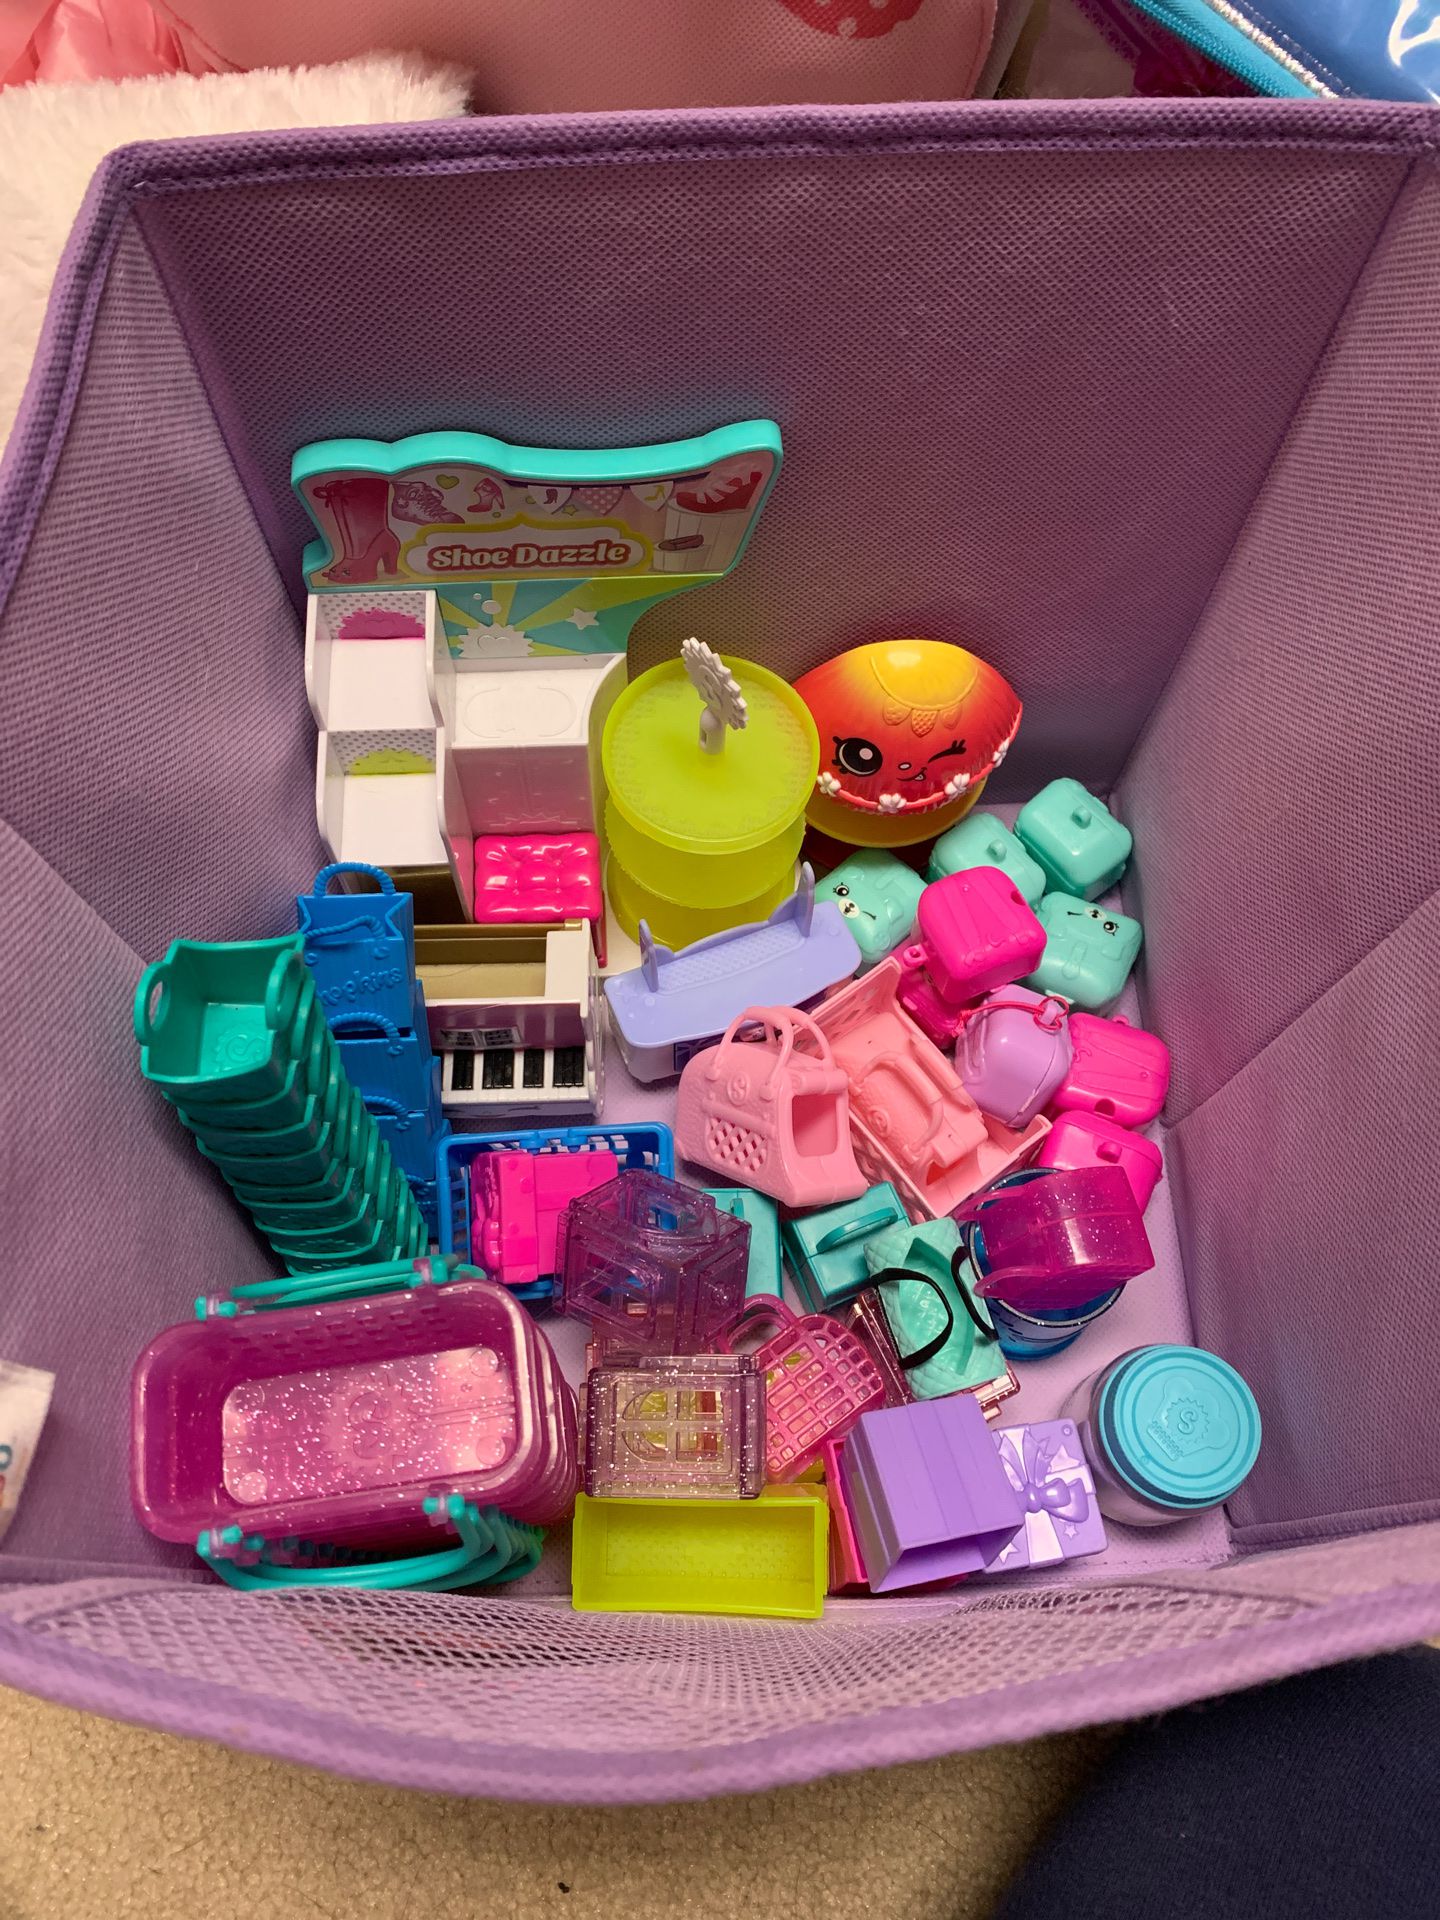 Shopkins and accessories. Mostly 2-3 years old.